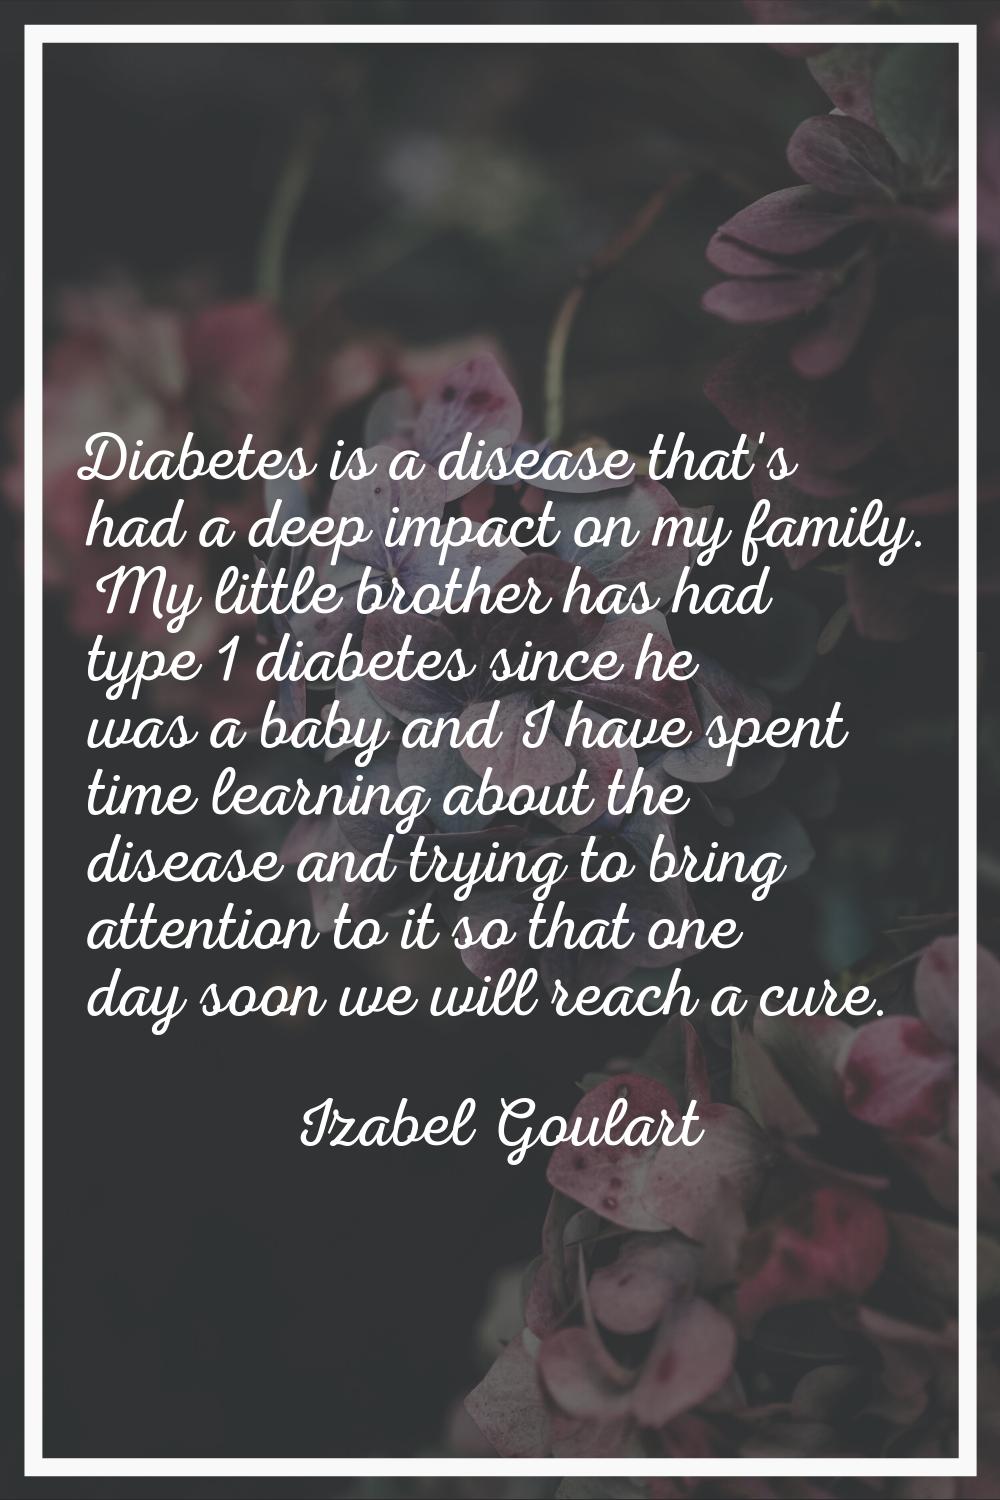 Diabetes is a disease that's had a deep impact on my family. My little brother has had type 1 diabe